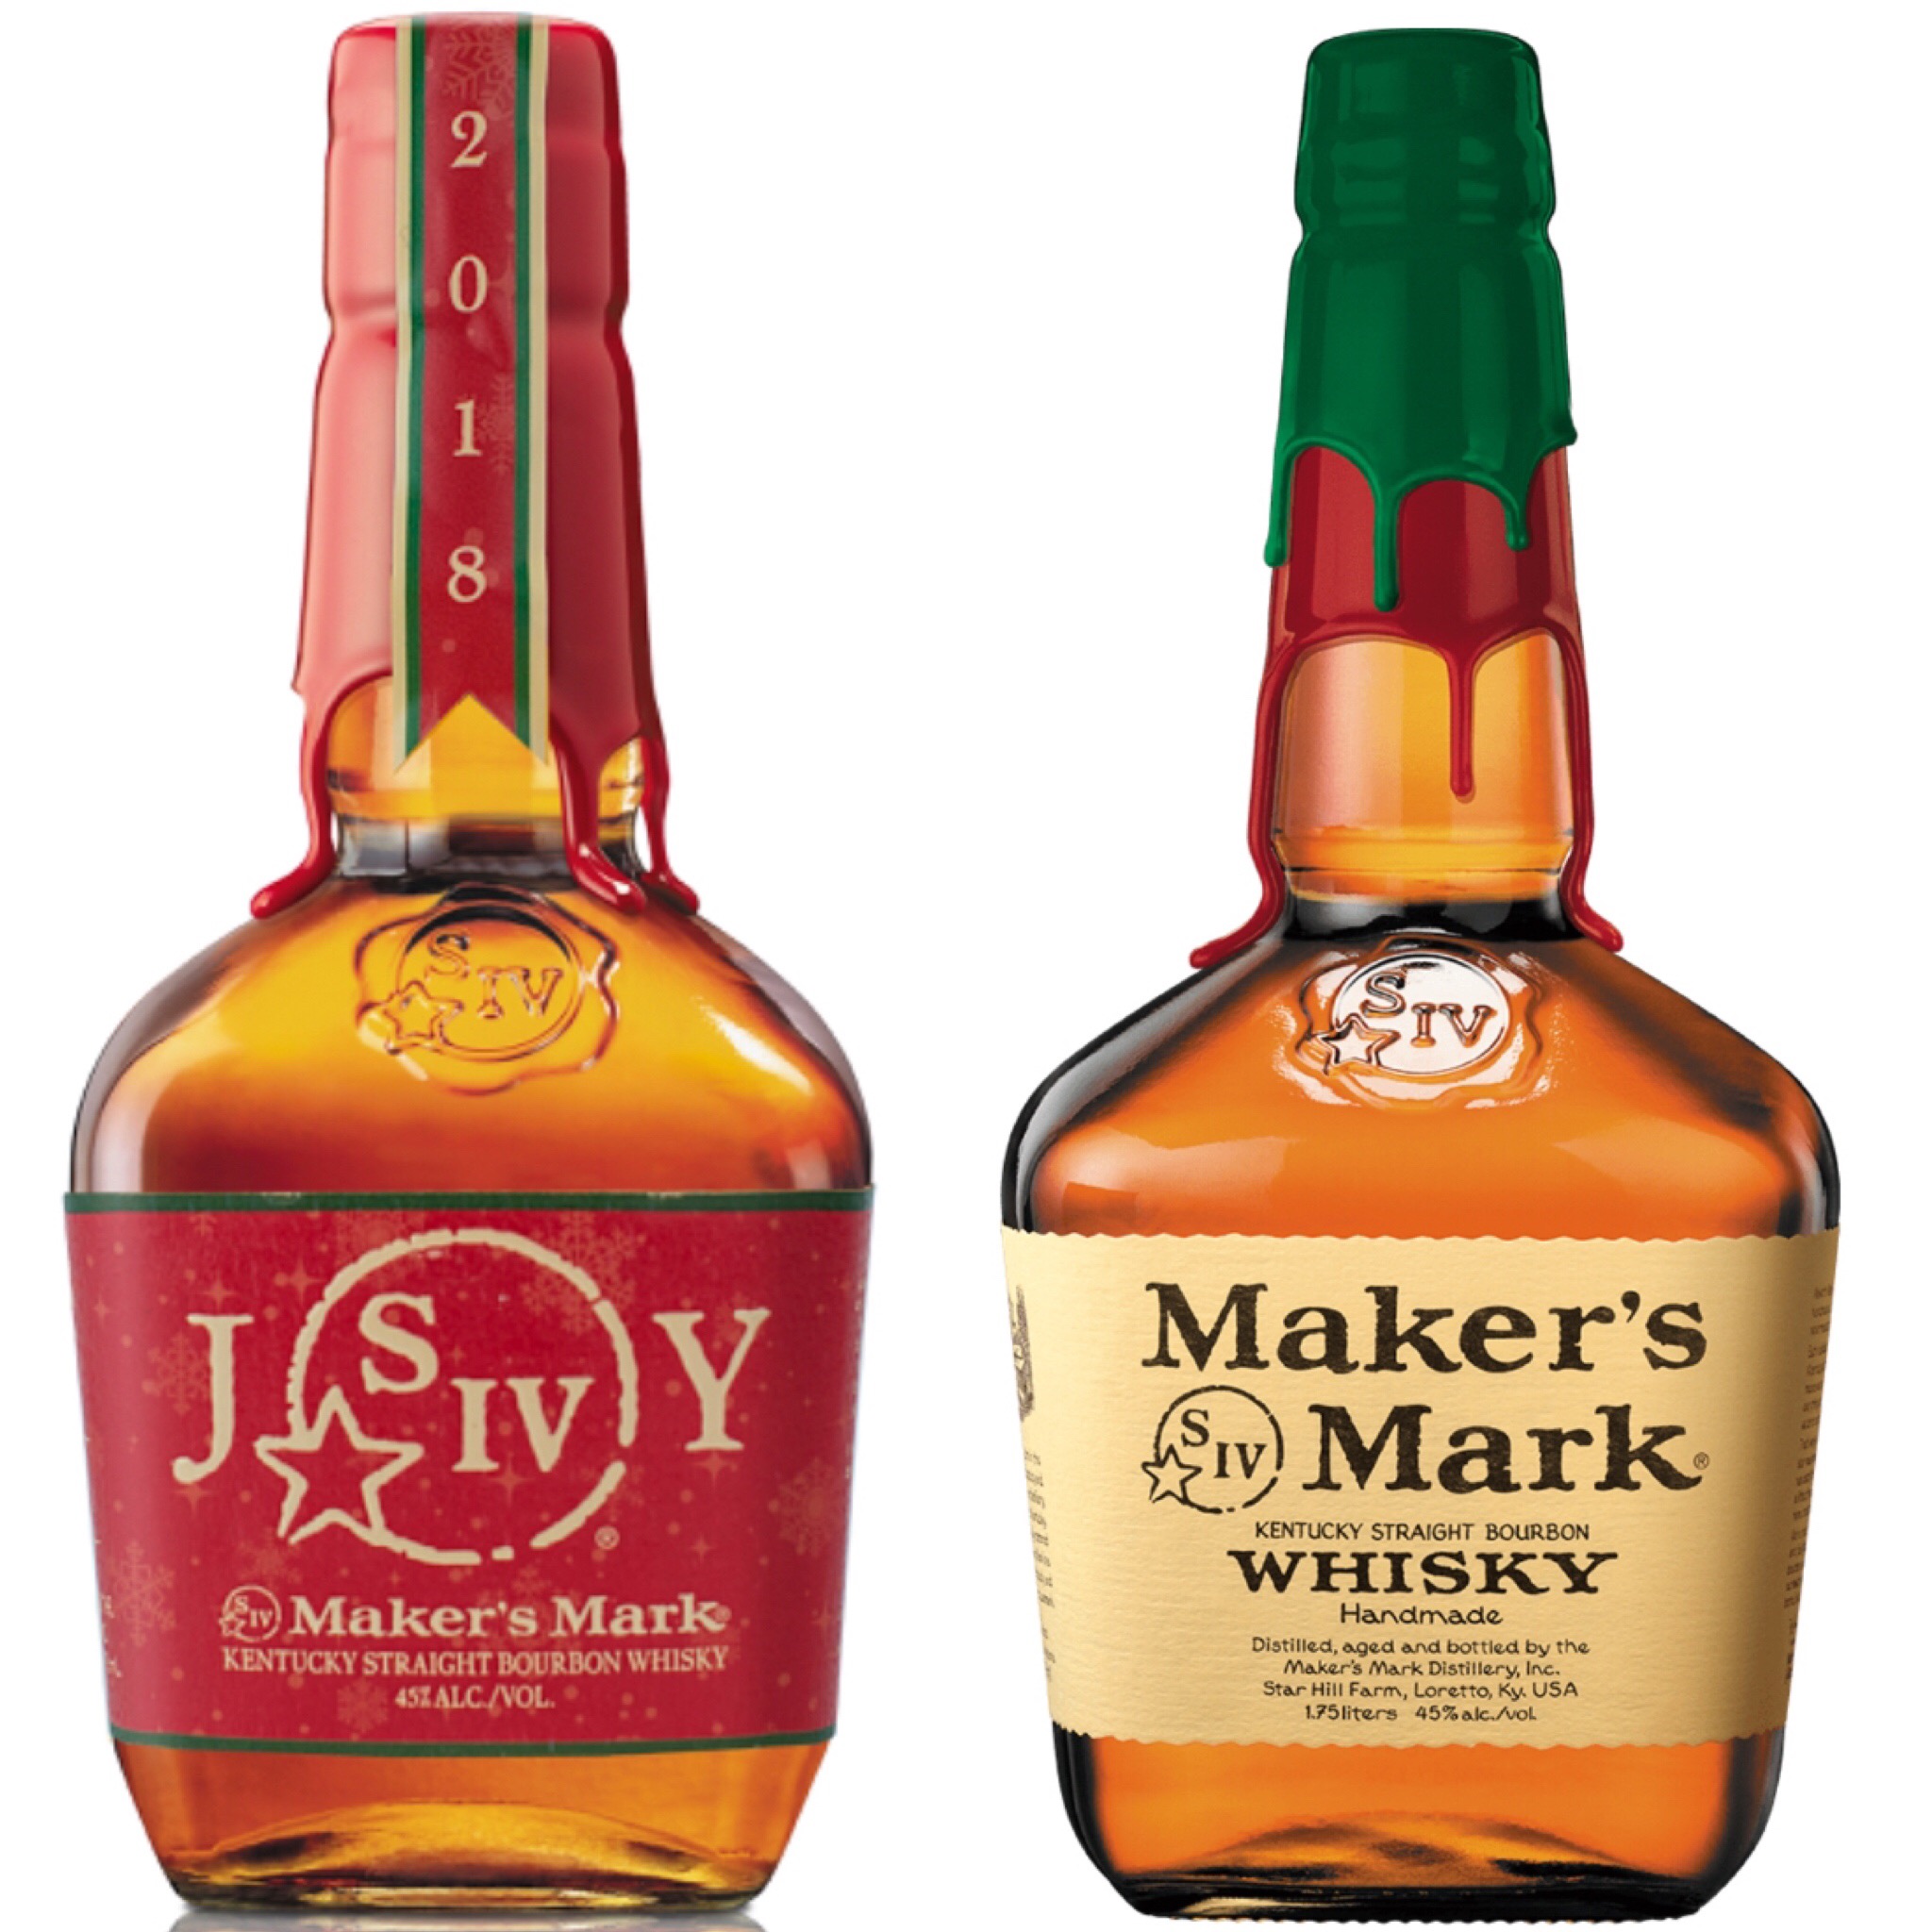 Makerâs Mark Releases Two Limited Edition Holiday Bottlings